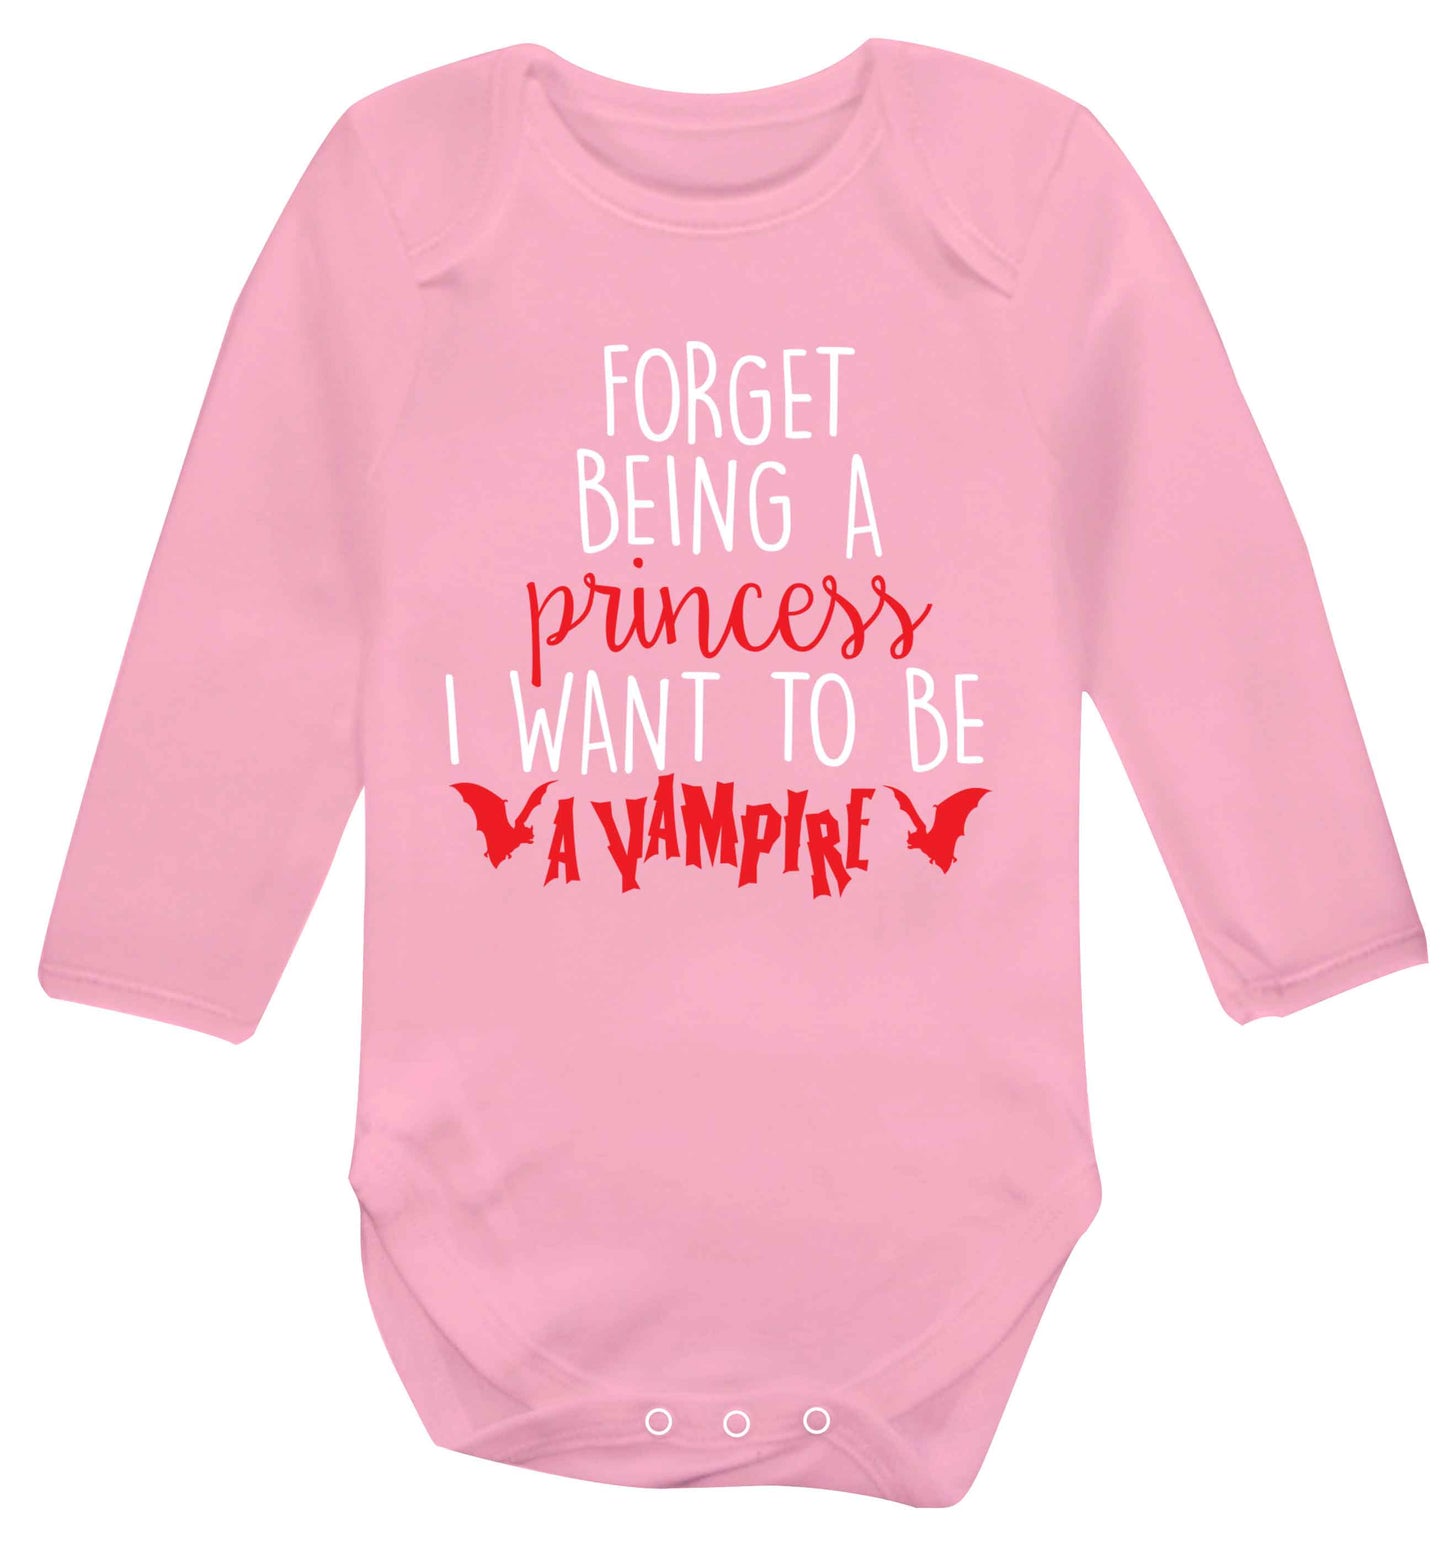 Forget being a princess I want to be a vampire Baby Vest long sleeved pale pink 6-12 months